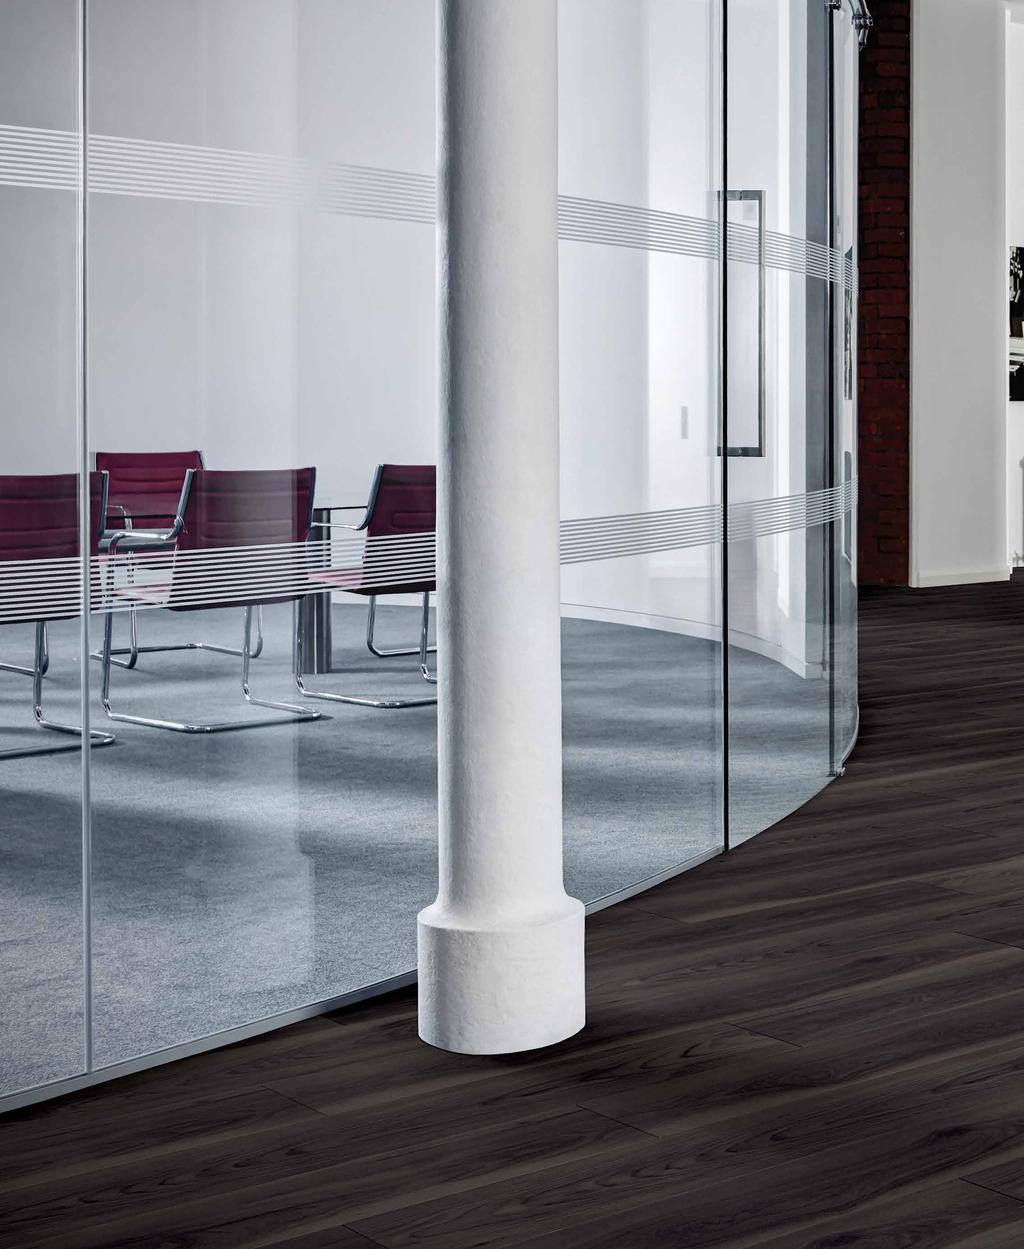 Delivering exceptional quality, durability and creative scope, our Amtico Spacia range has expanded to welcome 26 new design-led flooring products, highly suited to commercial environments and